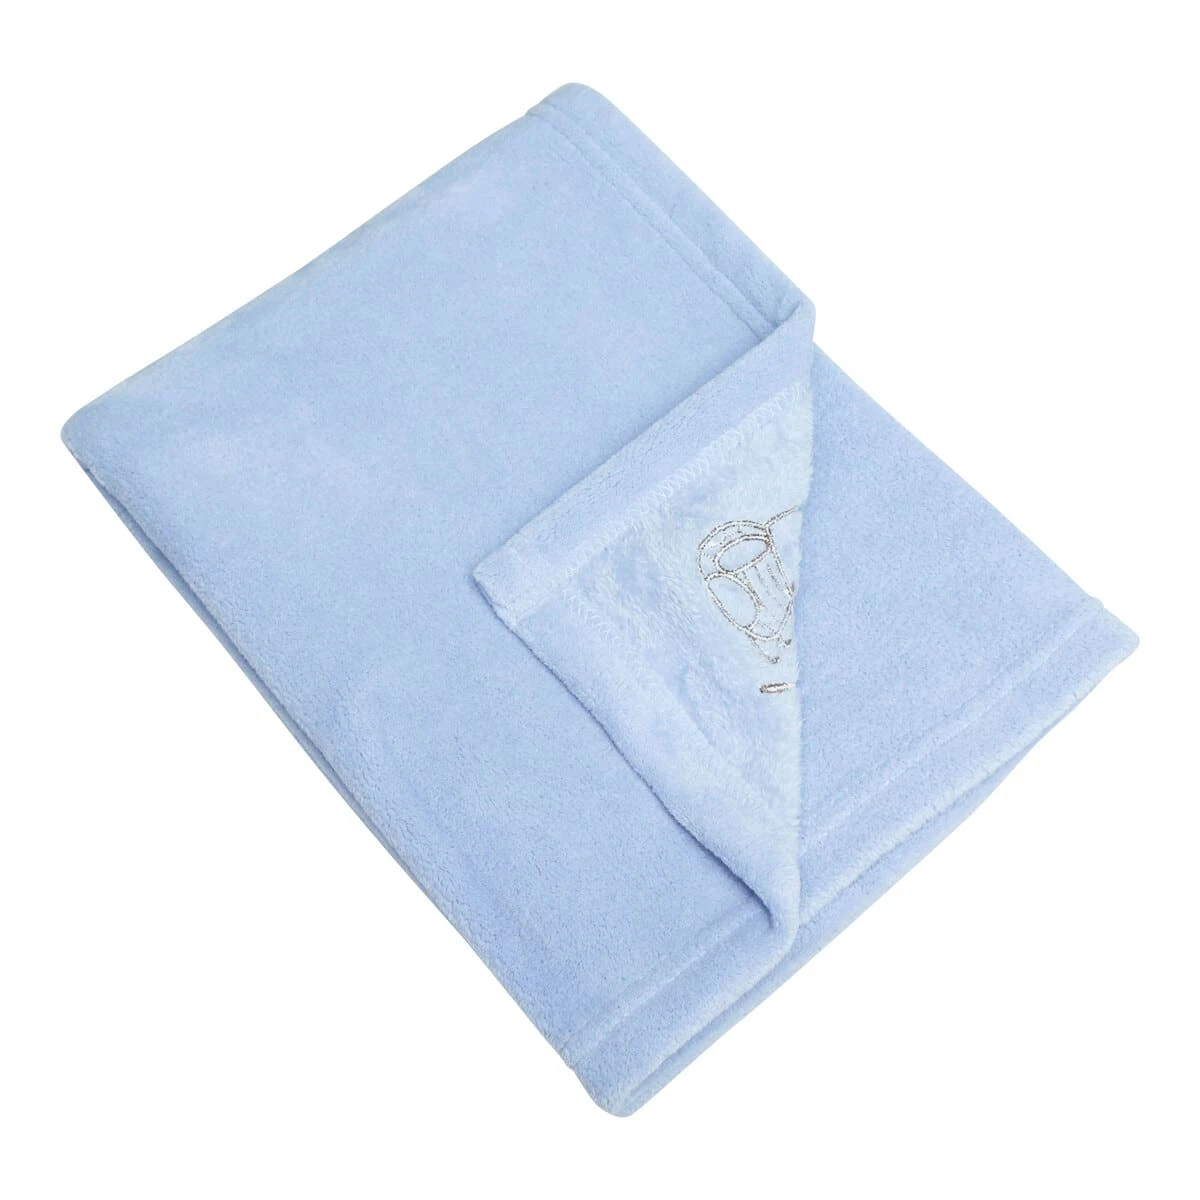 Cooking Turtle Embroidery Plush Baby Blanket (Blue)